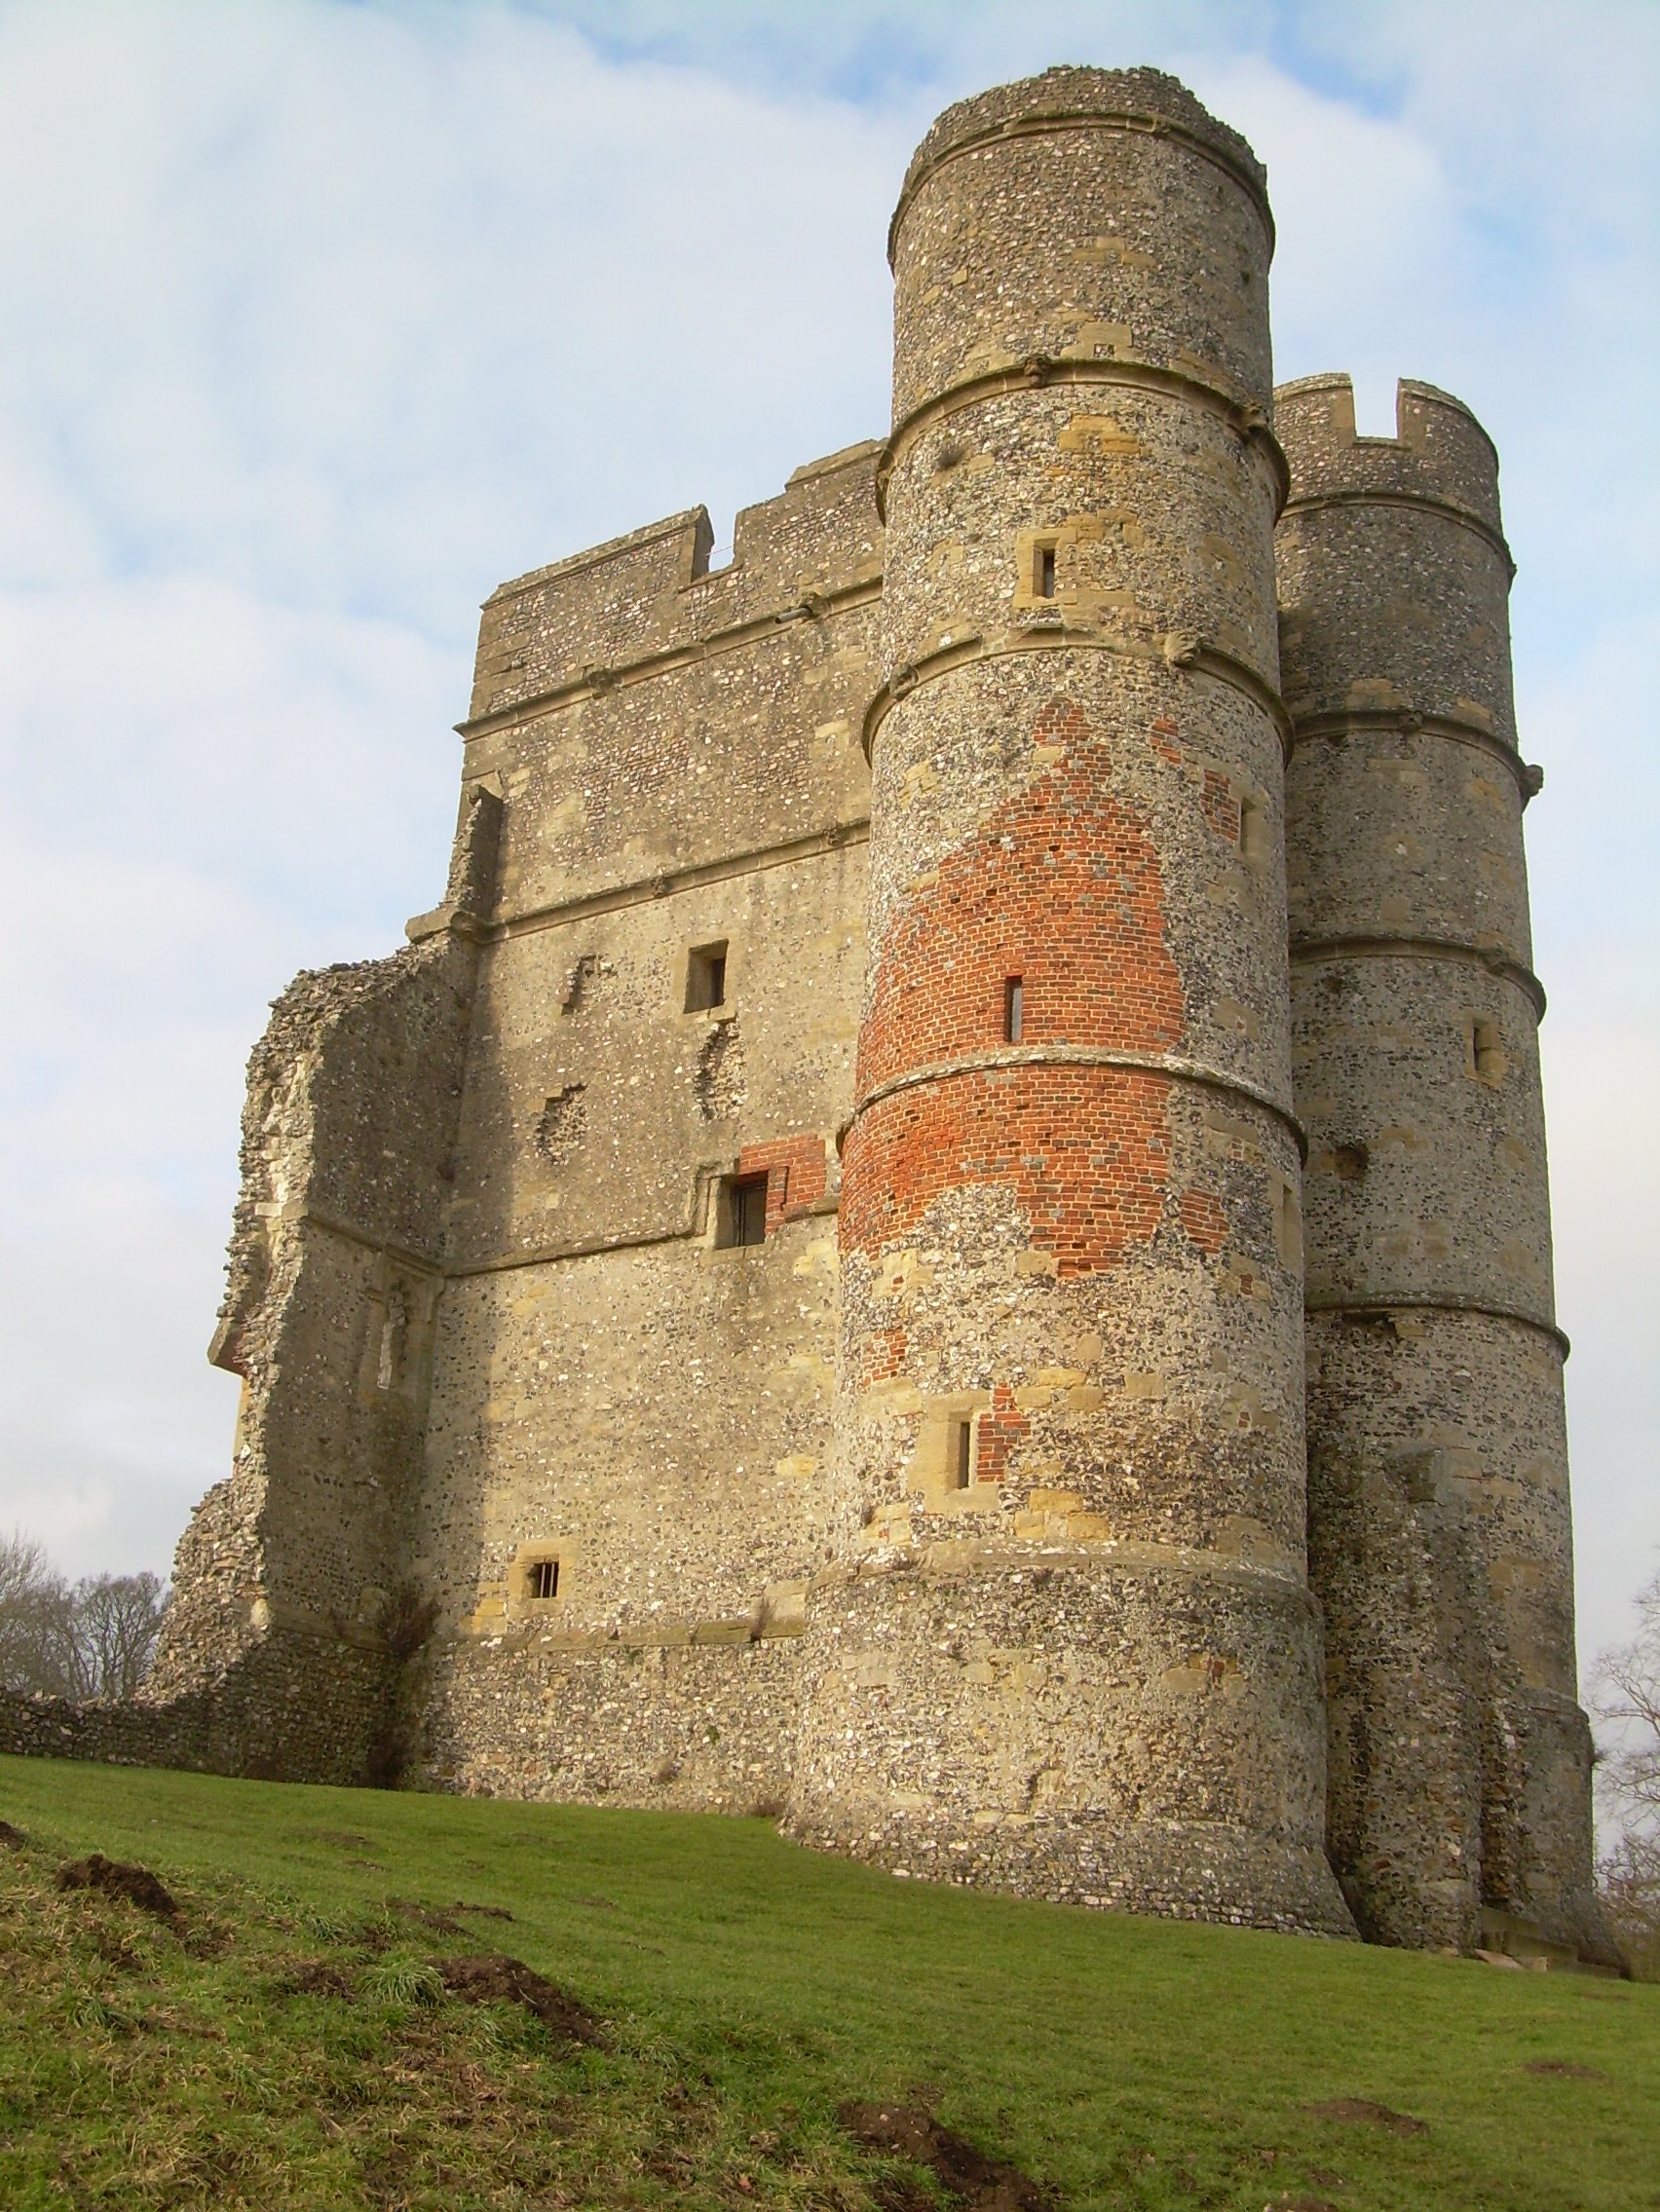 Donnington castle which played a role in the battle